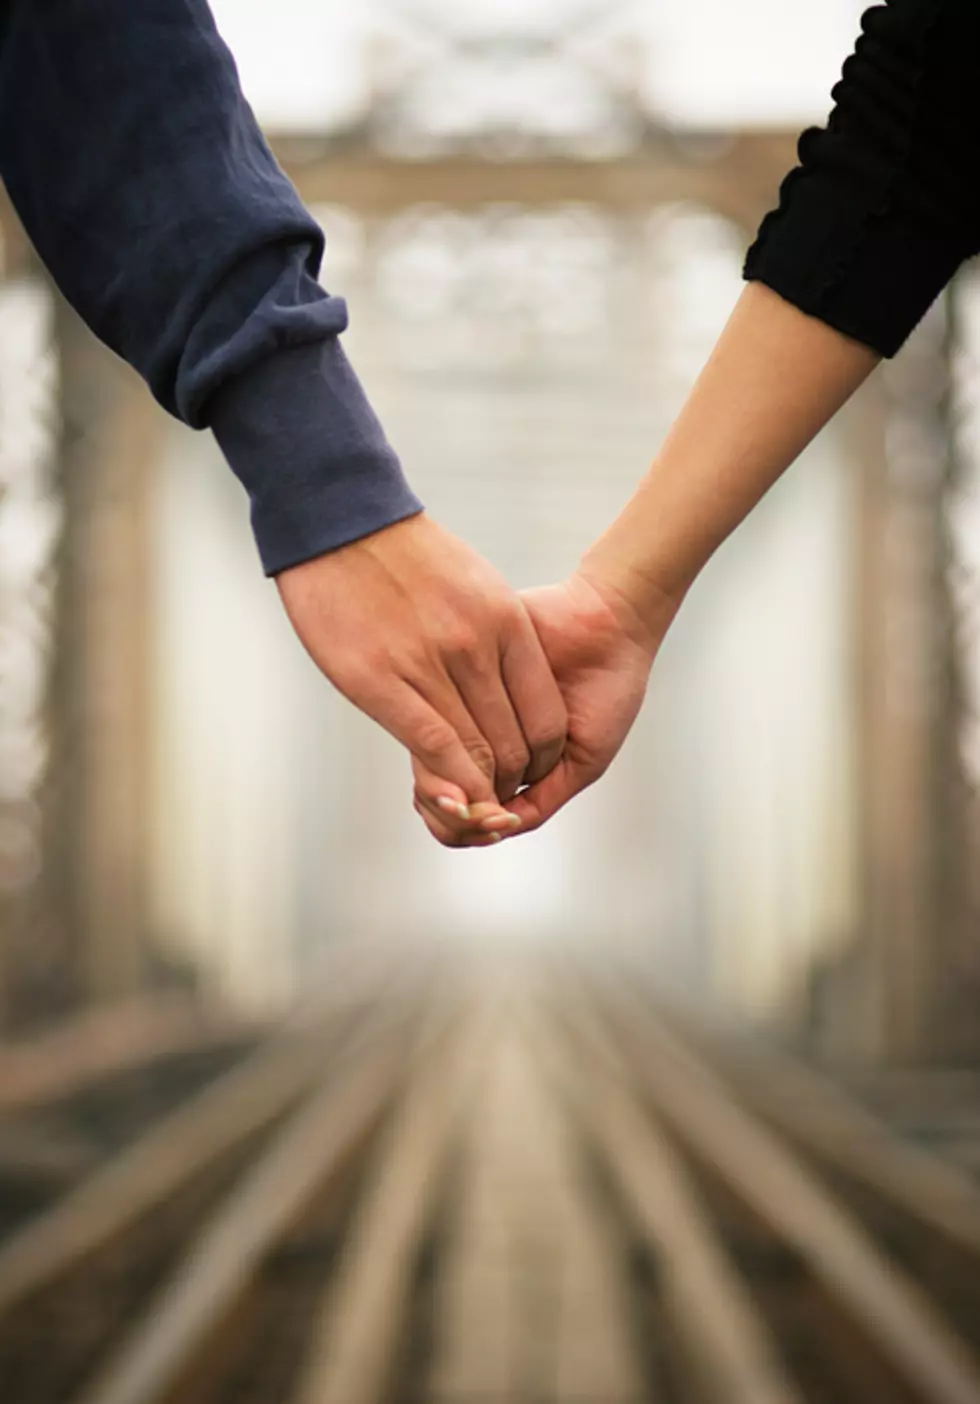 Why Do We Hold Hands?